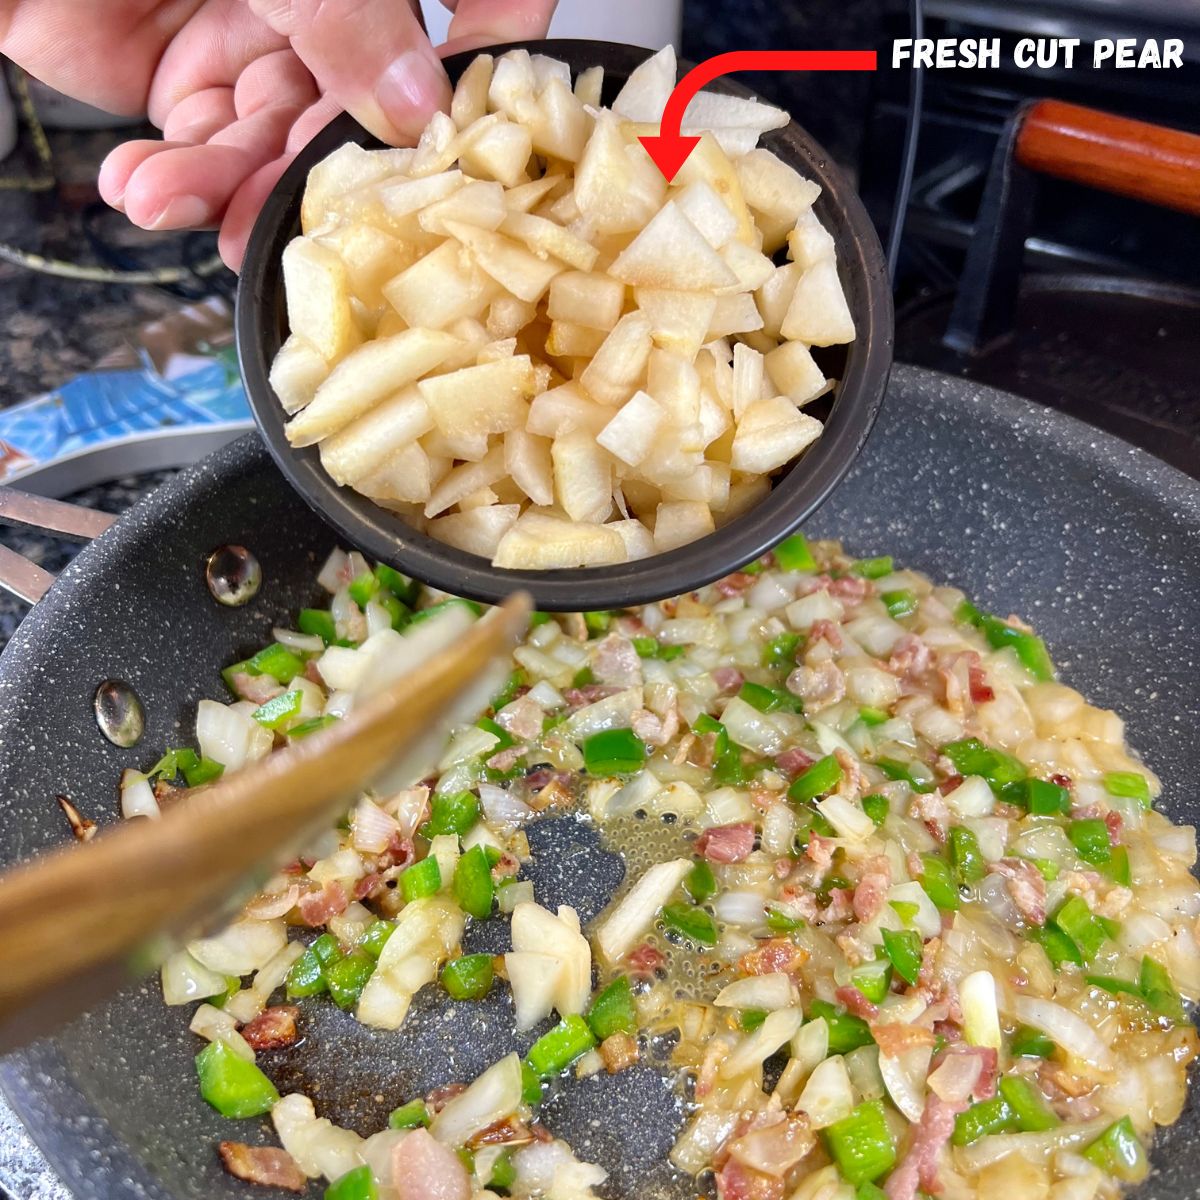 A hand holding a bowl of diced pear over a frying pan with bacon onion an jalapeños cooking